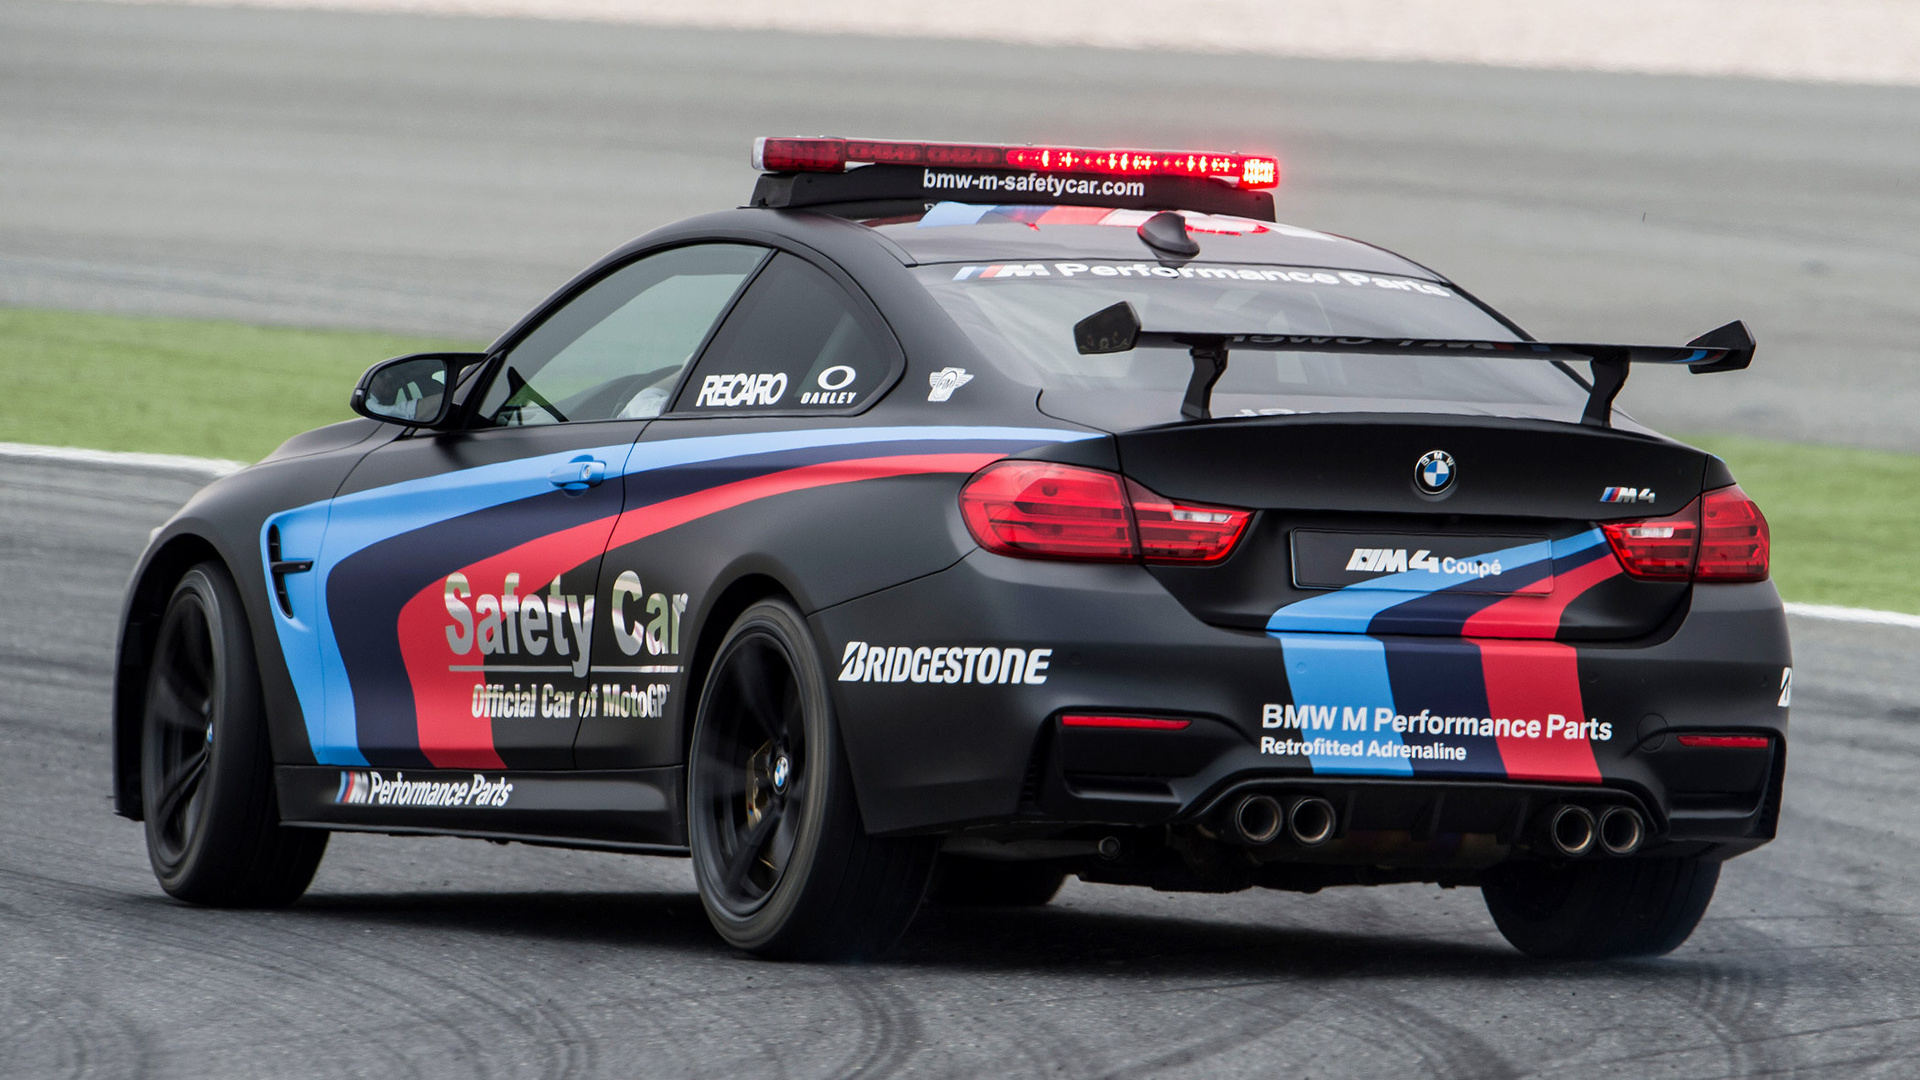 2015 Bmw M4 Motogp Safety Car Wallpapers Hd Wallpapers  2017  2018 